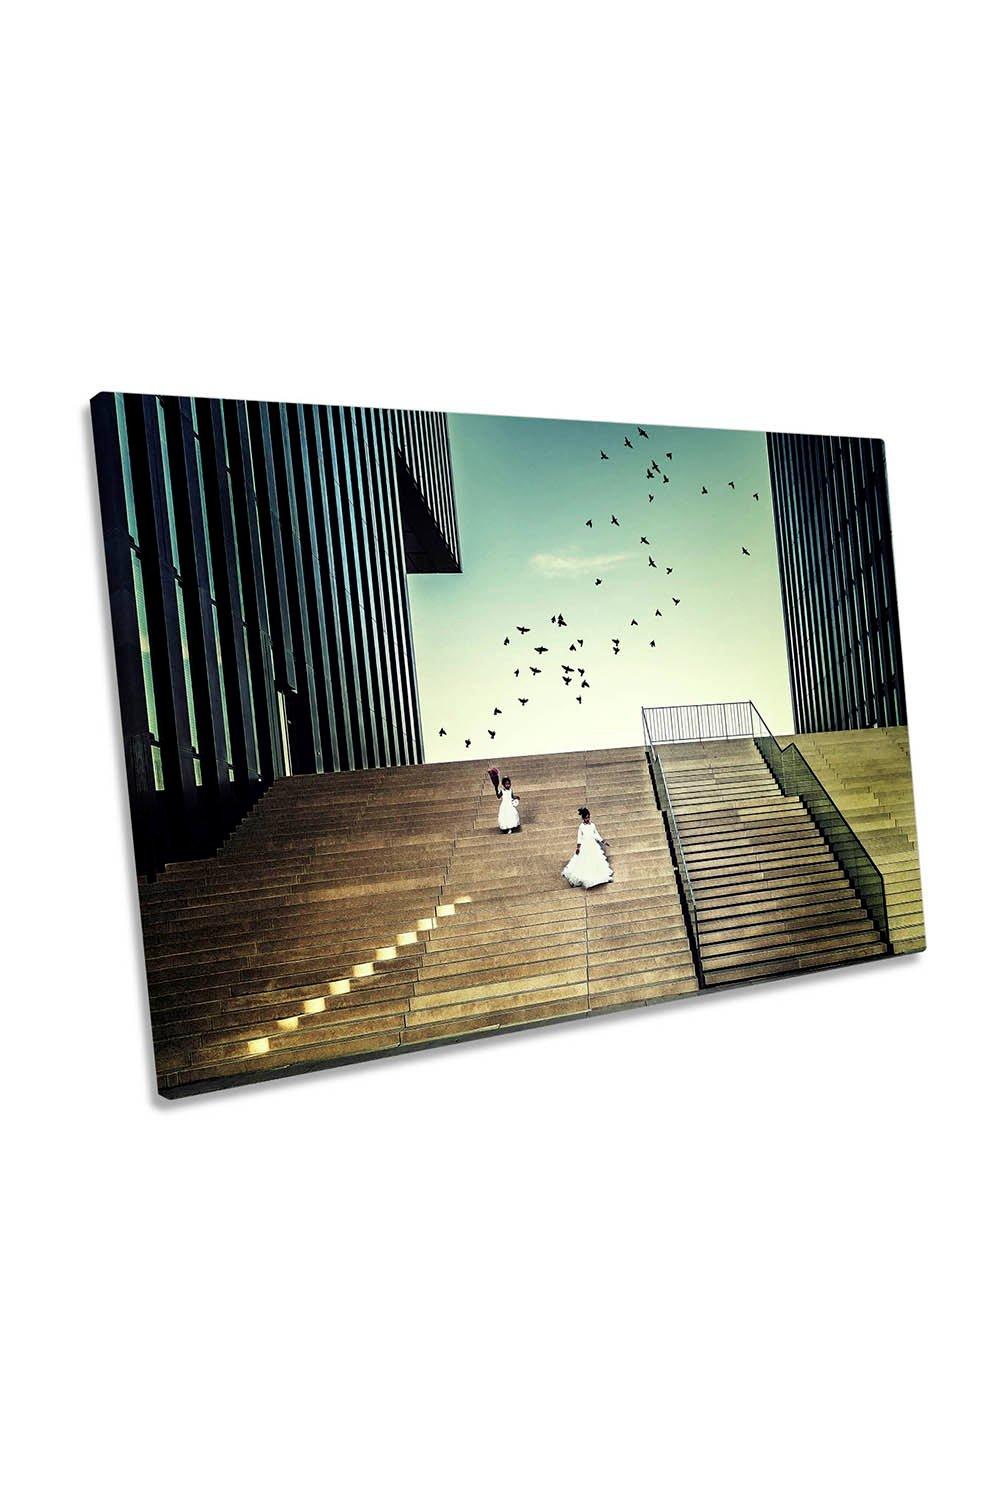 Free like a Bird Urban Photography Canvas Wall Art Picture Print